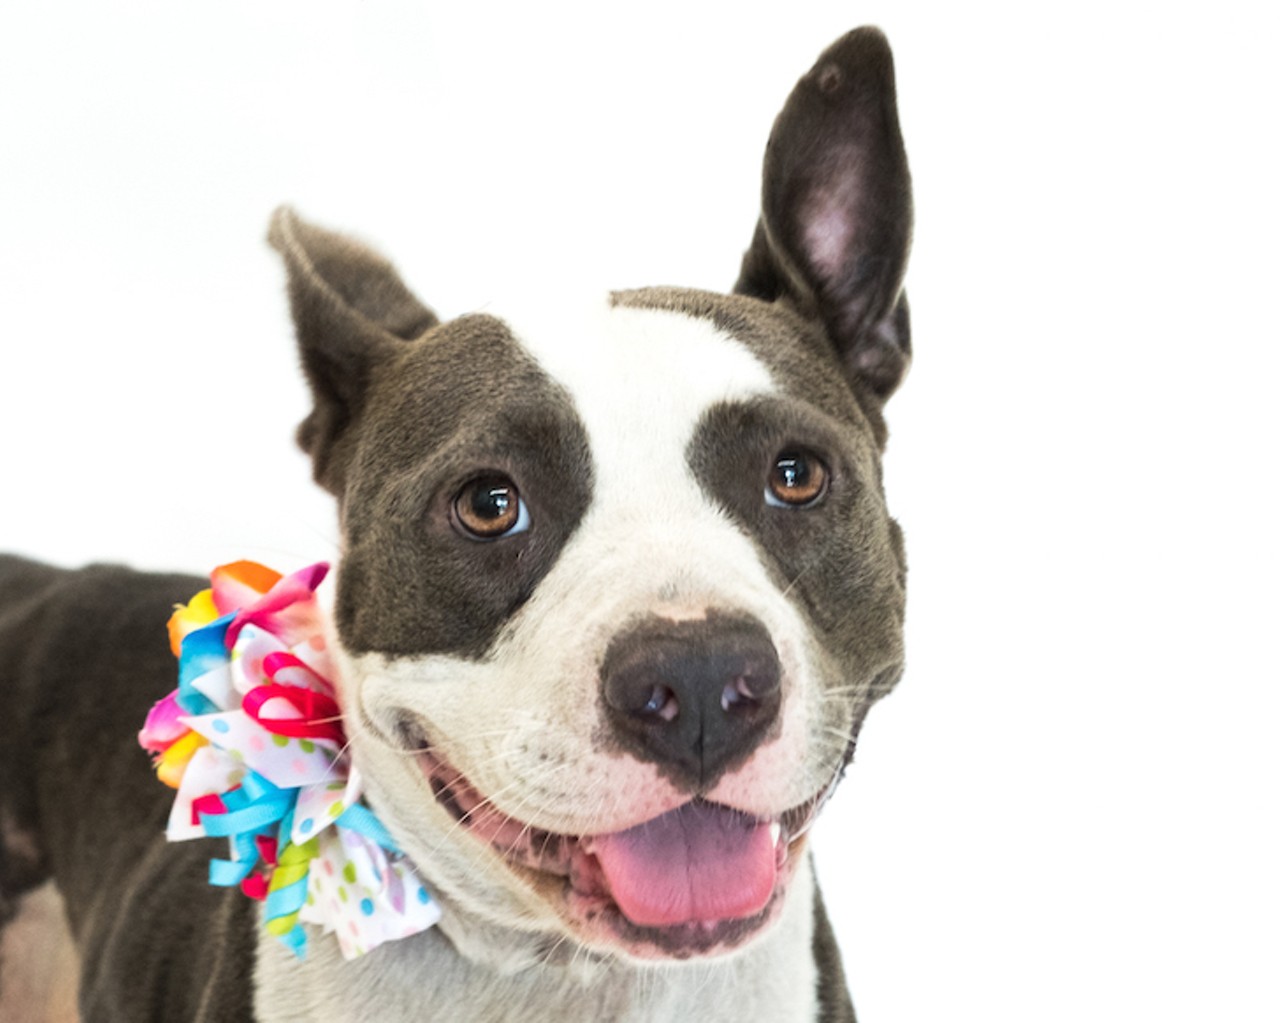 14 adoptable dogs available right now at Orange County Animal Services